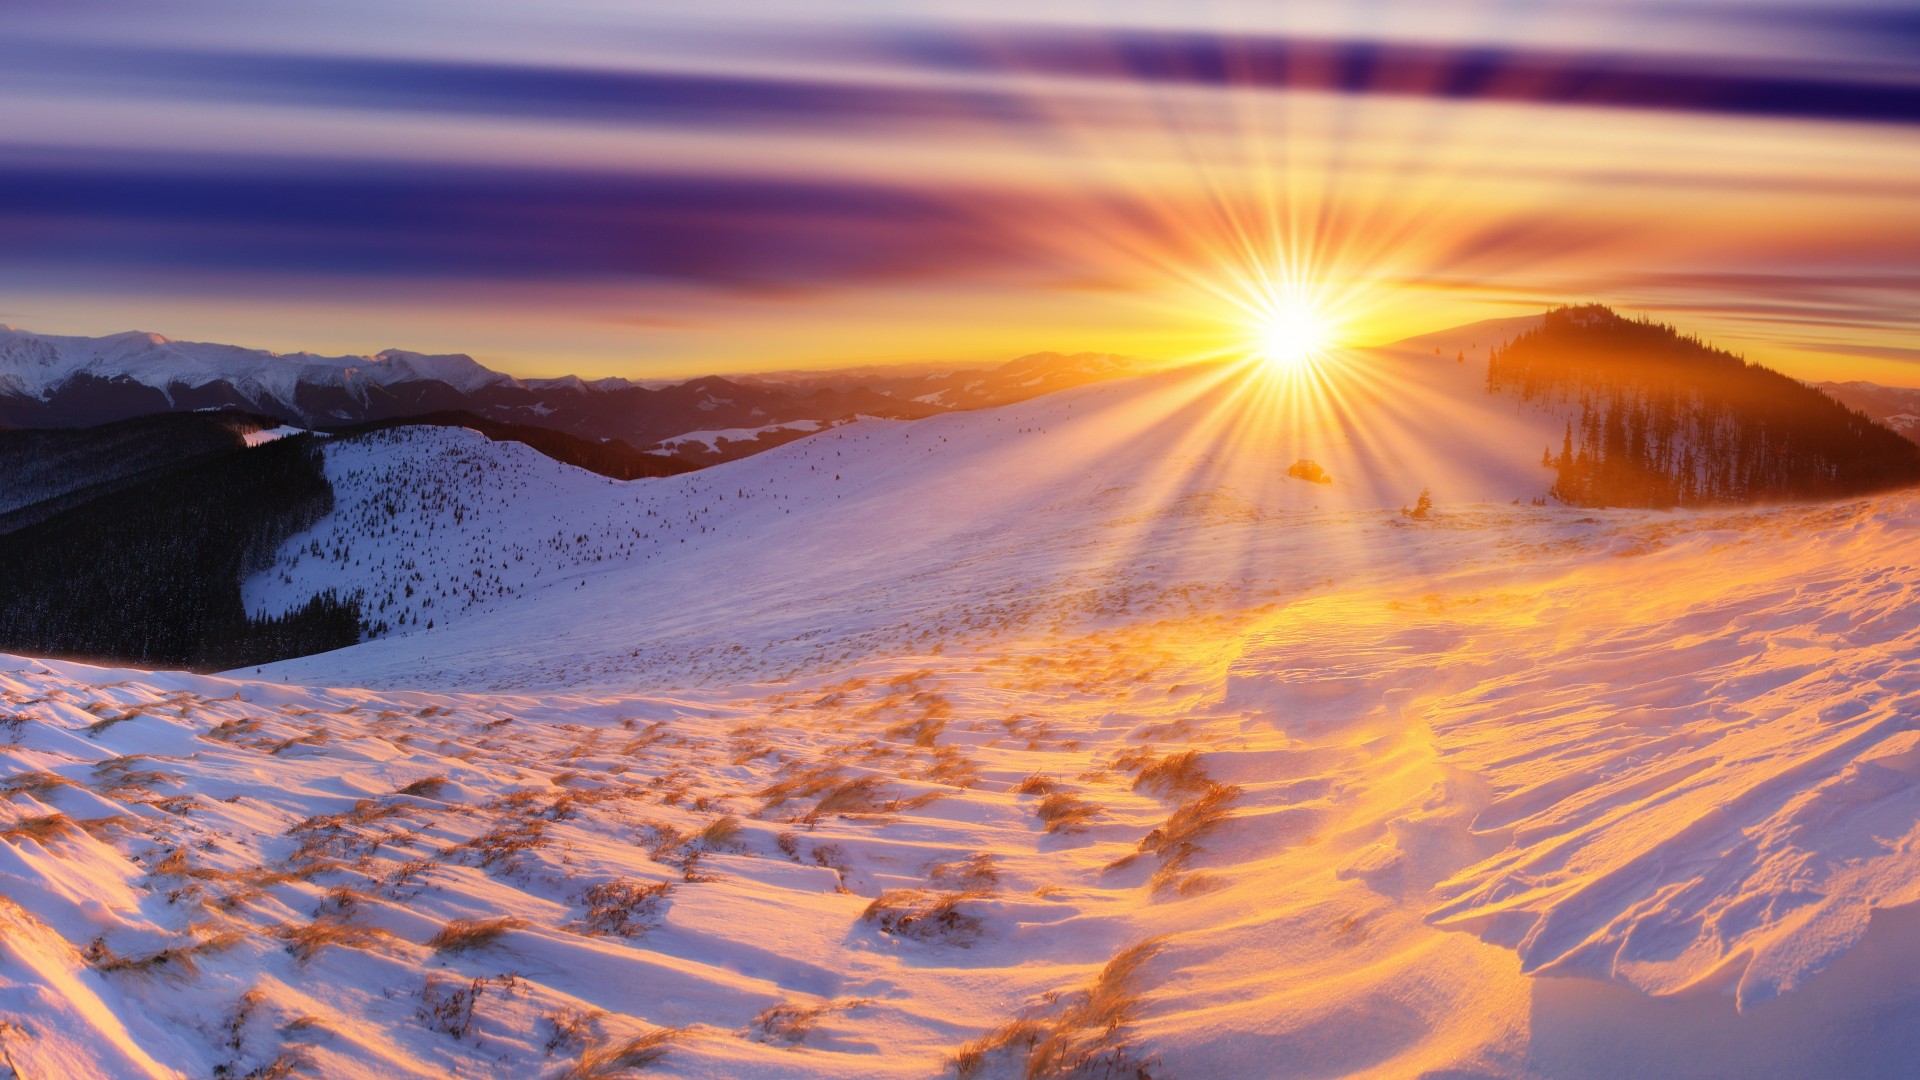 Snow Winter Sky Clouds HDr Sunset Sunrise Wallpaper Background